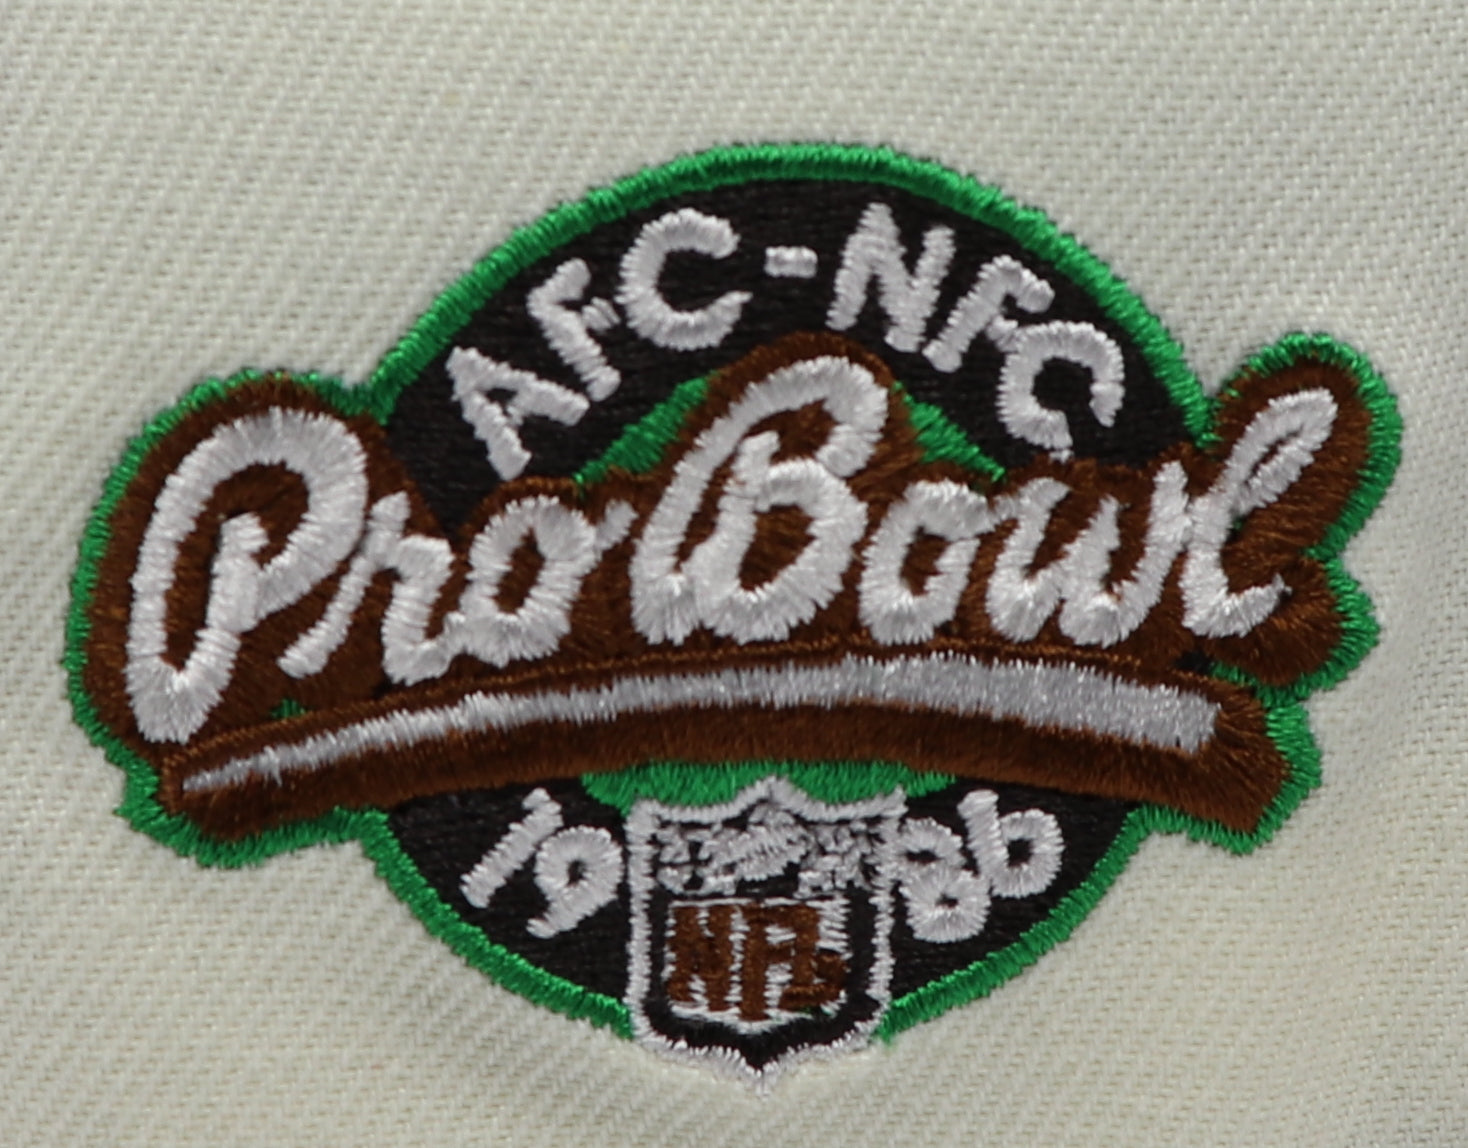 CHICAGO BEARS (1986 PRO BOWL) NEW ERA 59FIFTY FITTED (GREEN UNDER VISOR)